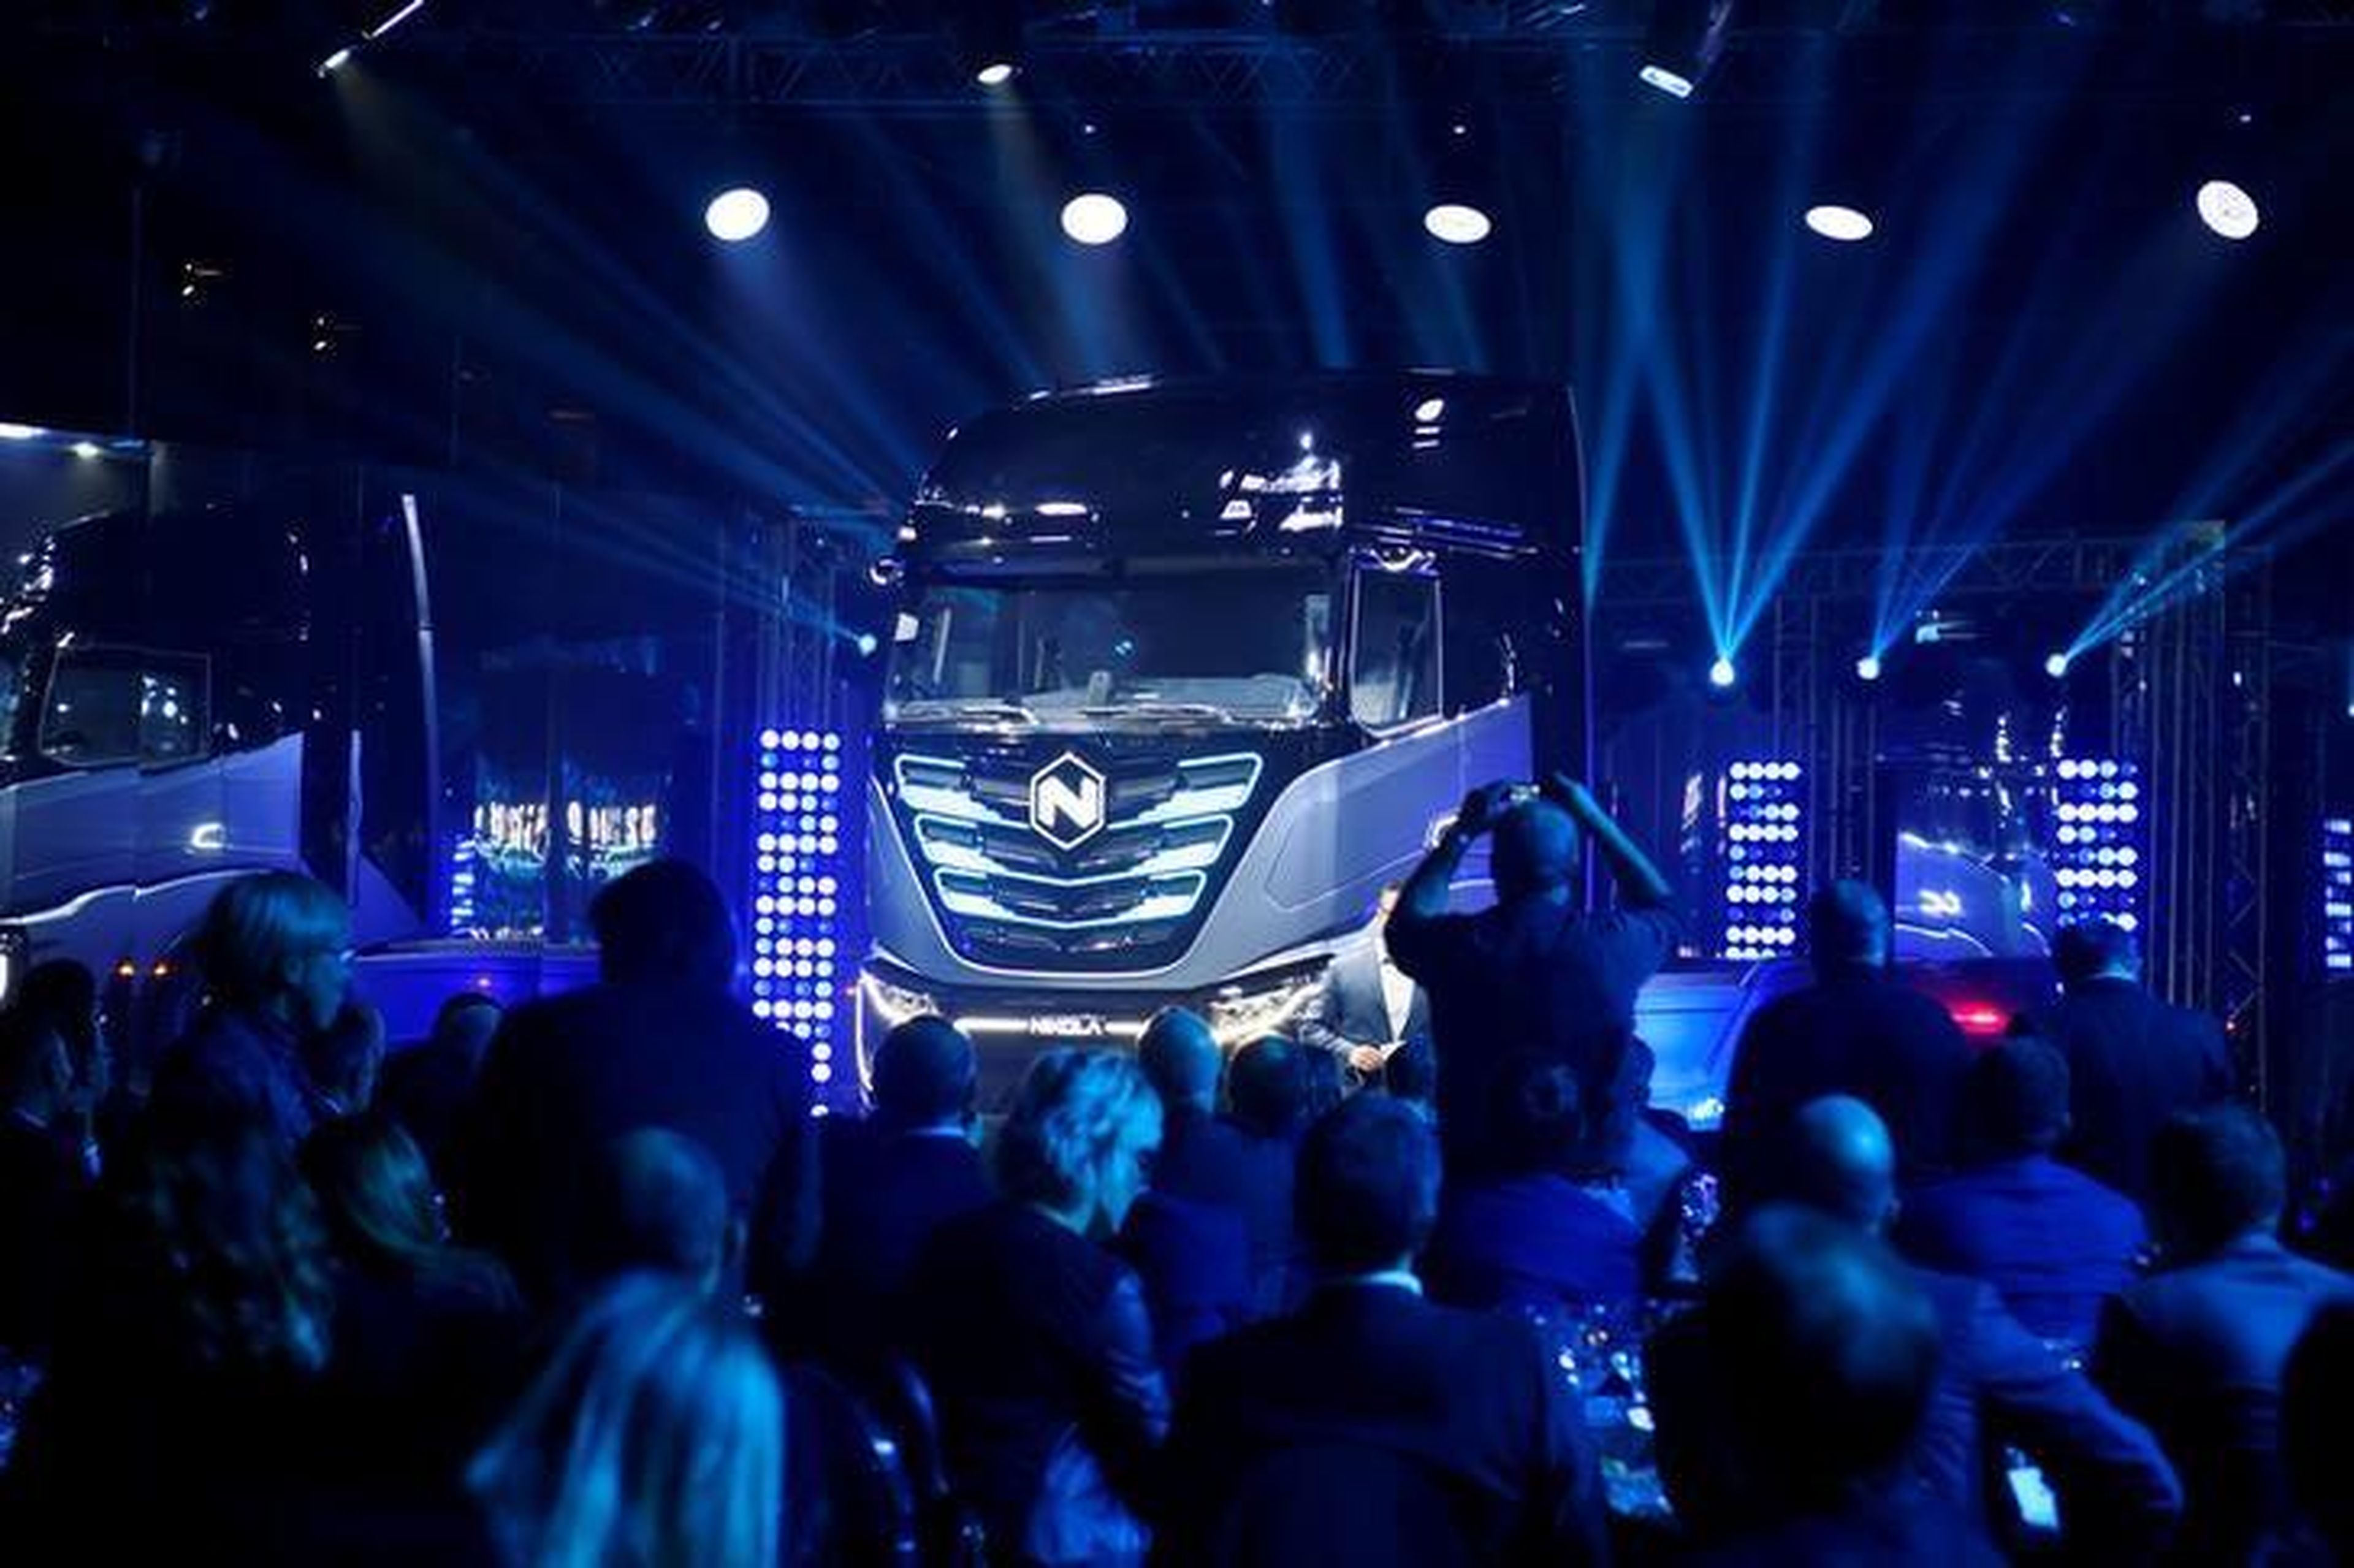 Italian-American industrial vehicle maker CNH's truck unit Iveco presents its new full-electric and hydrogen fuel-cell battery trucks in partnership with U.S. Nikola